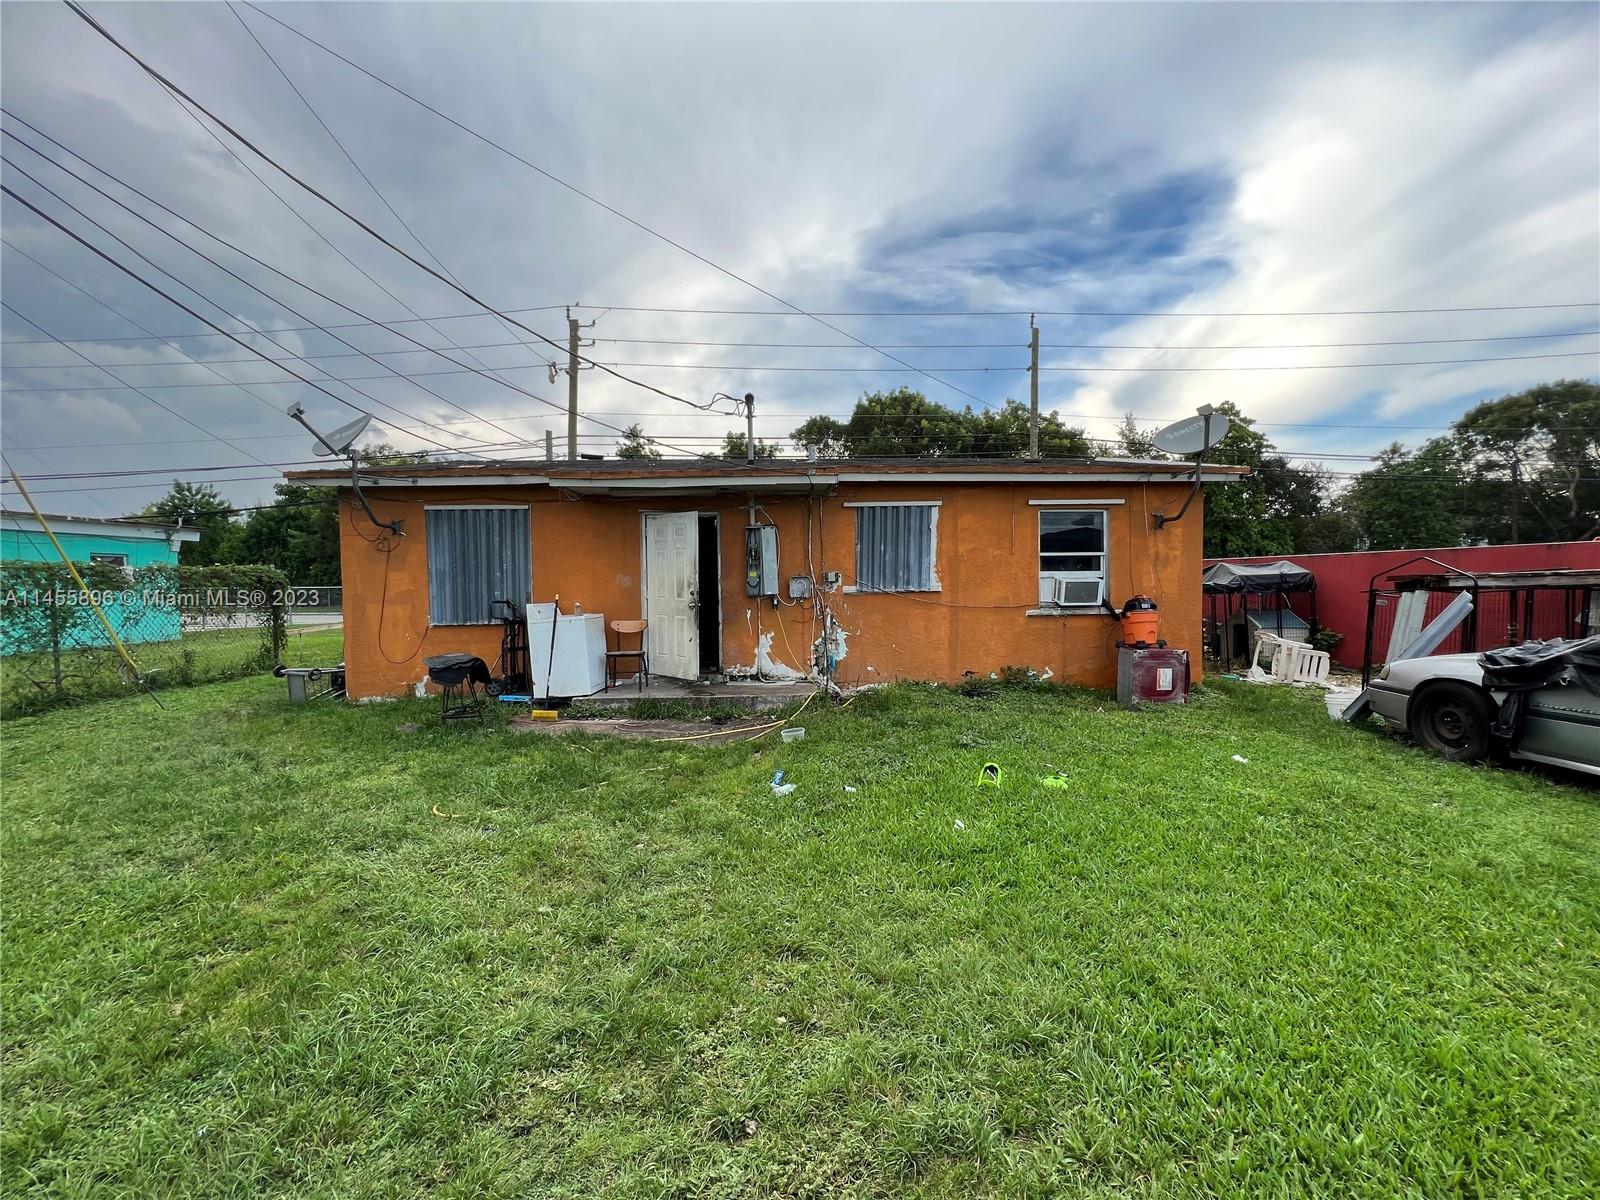 Are you looking for the perfect investment opportunity in the heart of Florida City? Look no further! This unique property offers an incredible chance to maximize your real estate portfolio's potential. With a spacious lot, zoning for multiplex development up to 10 units, and a prime location near shops, parks, and restaurants, this is a must-see opportunity for savvy investors. This property features a cozy 2-bedroom, 1-bathroom single-family home with an additional bonus bedroom. While it needs some TLC and updates, it presents a fantastic opportunity to design and renovate according to your vision. The spacious layout offers endless possibilities for customization, making it an ideal project for investors looking to maximize their ROI.